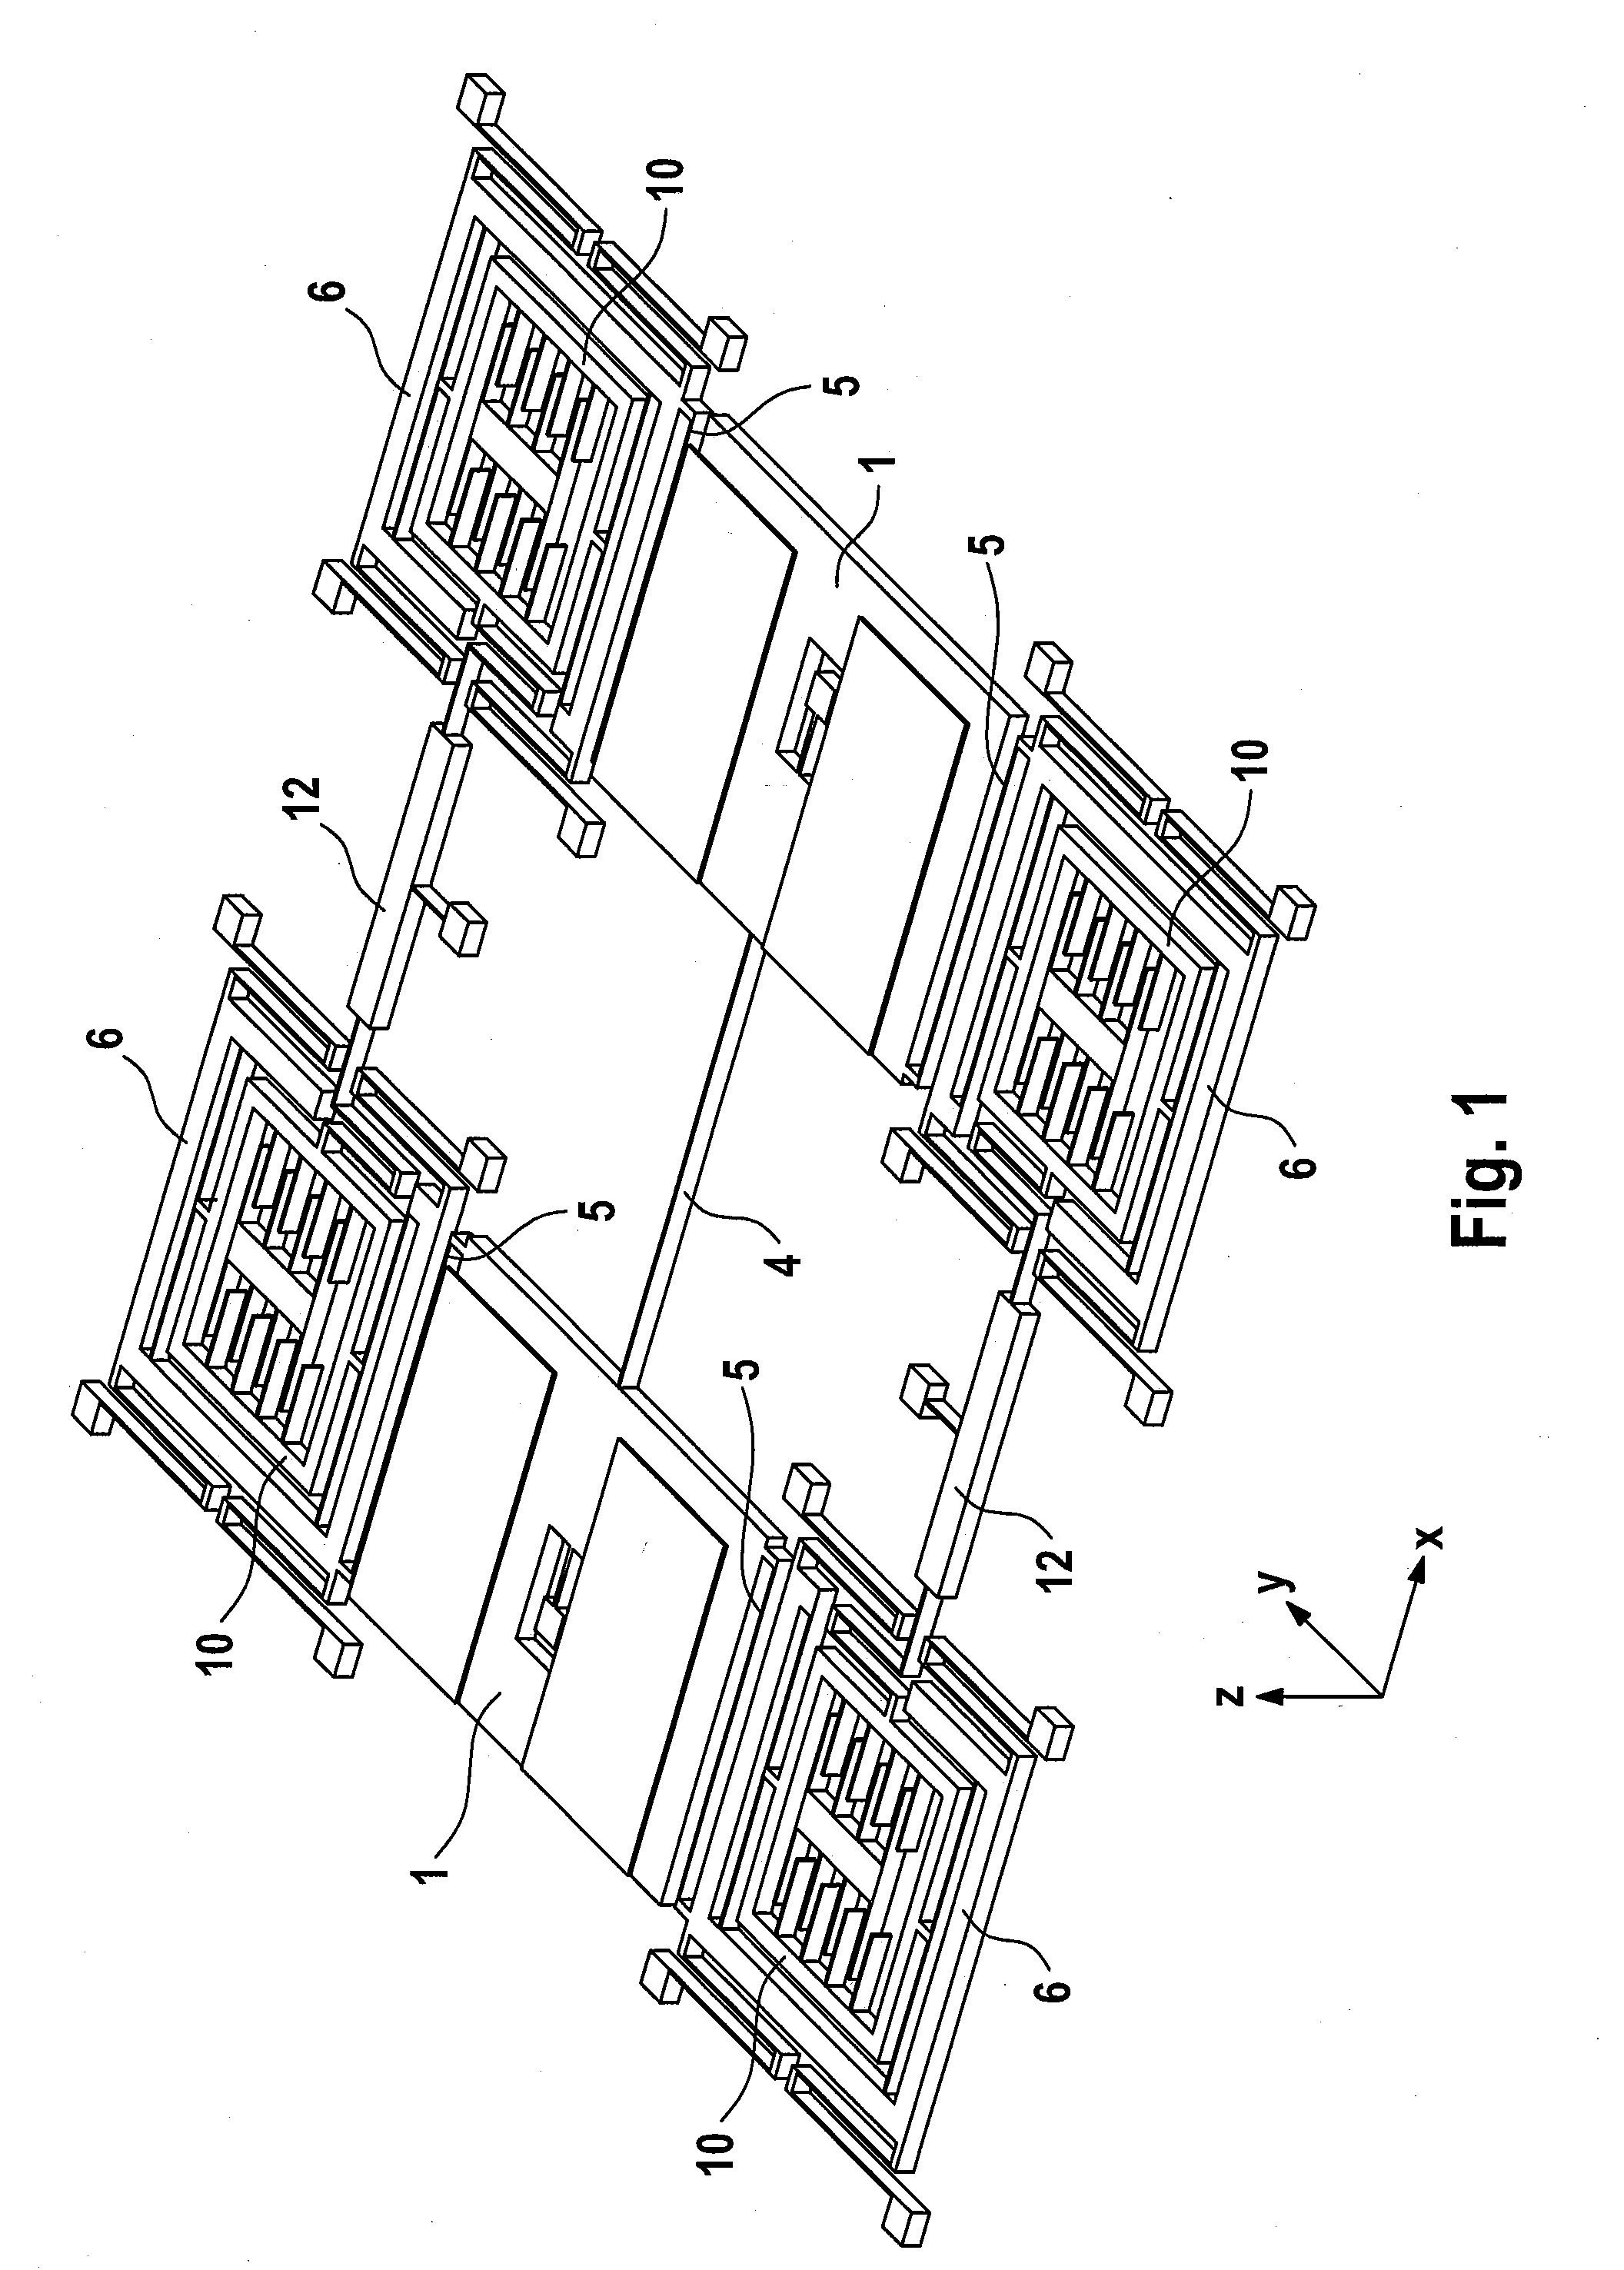 Double-axle, shock-resistant rotation rate sensor with linear and rotary seismic elements